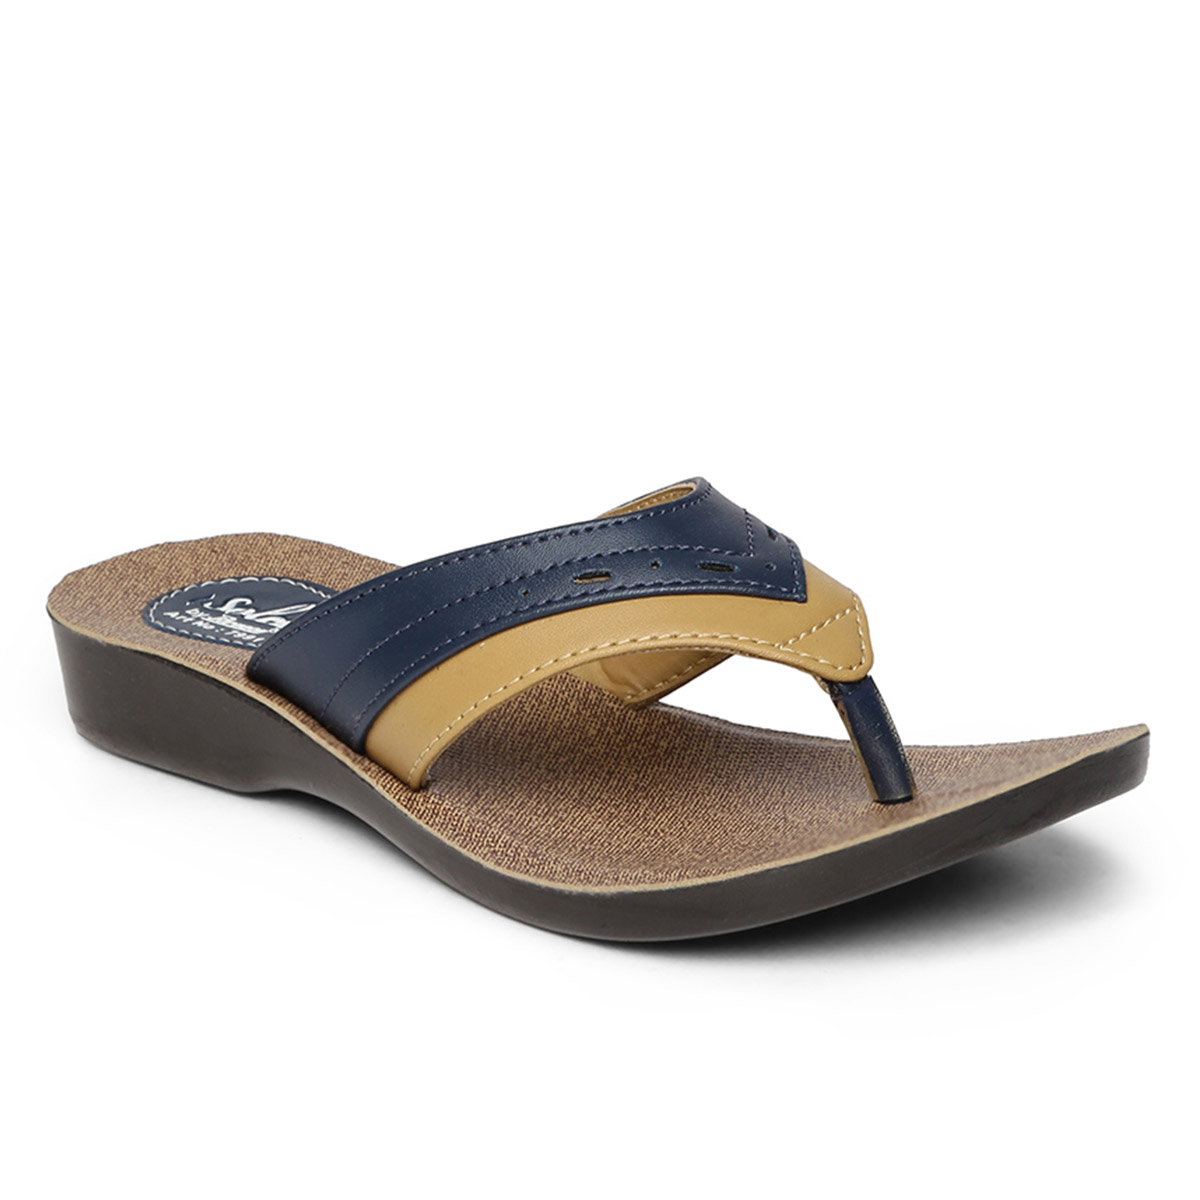 Buy Paragon-Solea Women's Blue Slippers Online @ ₹269 from ShopClues